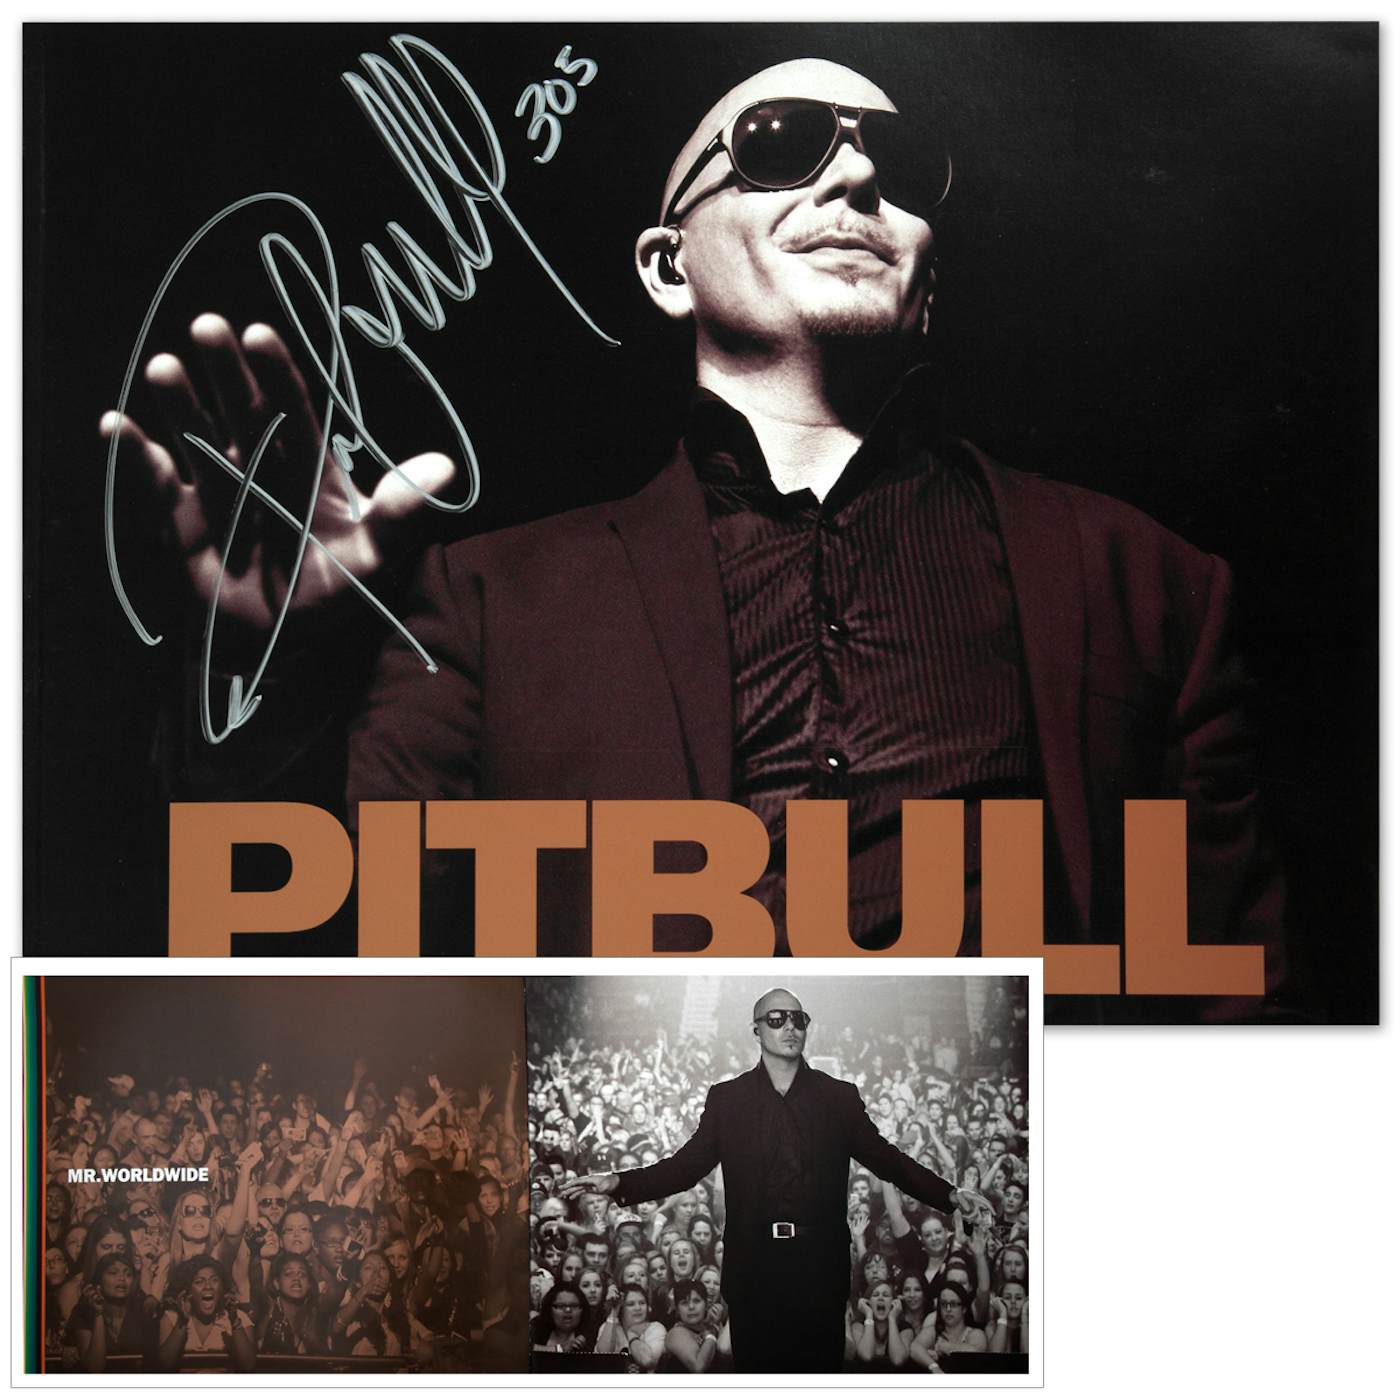 PITBULL AUTOGRAPHED Limited Edition Tour Book